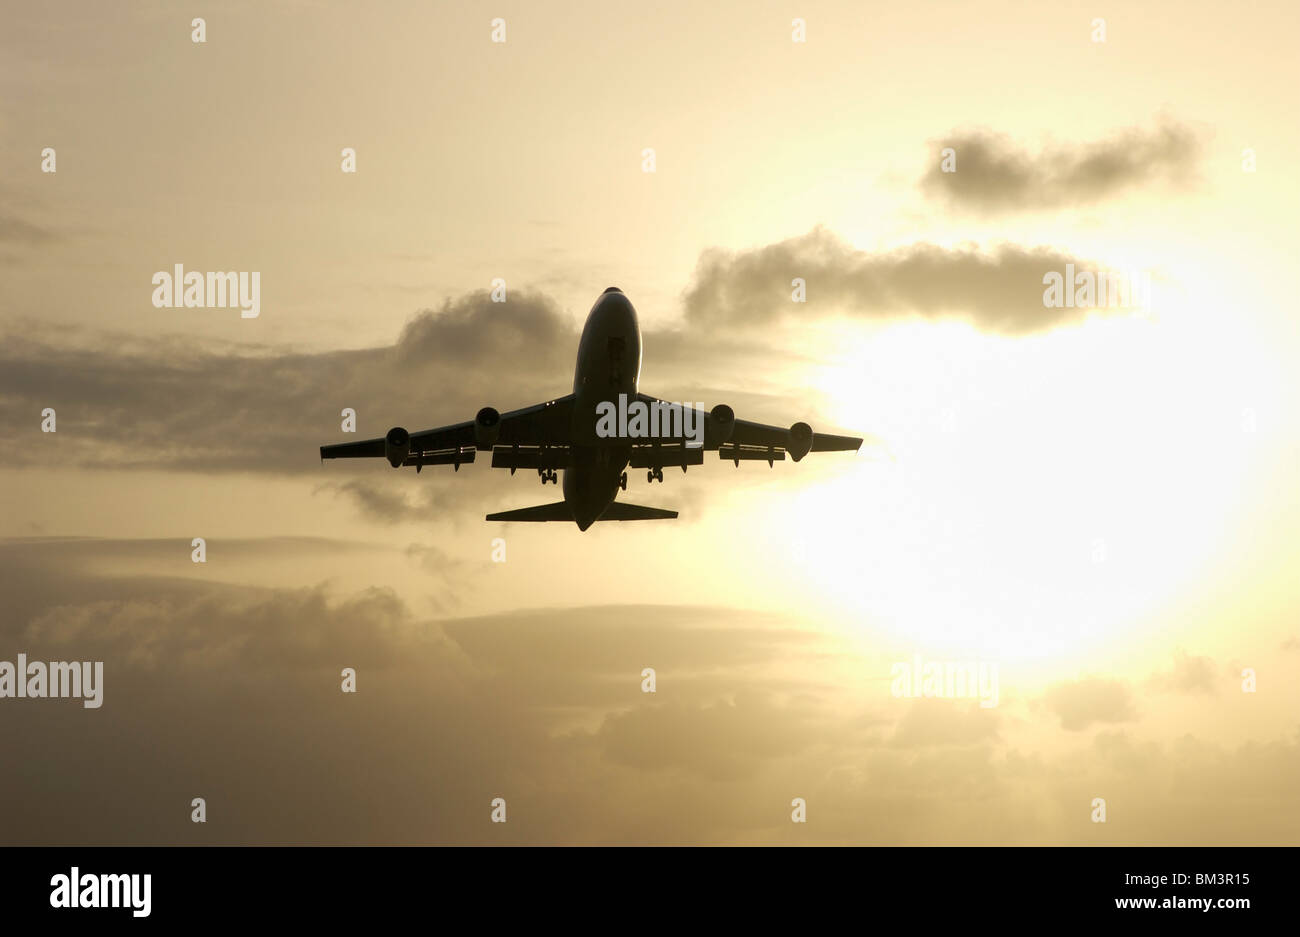 A Boeing 747 jumbo jet departing Point à Pitre airport (PTP) at sunset, Guadeloupe FR Stock Photo